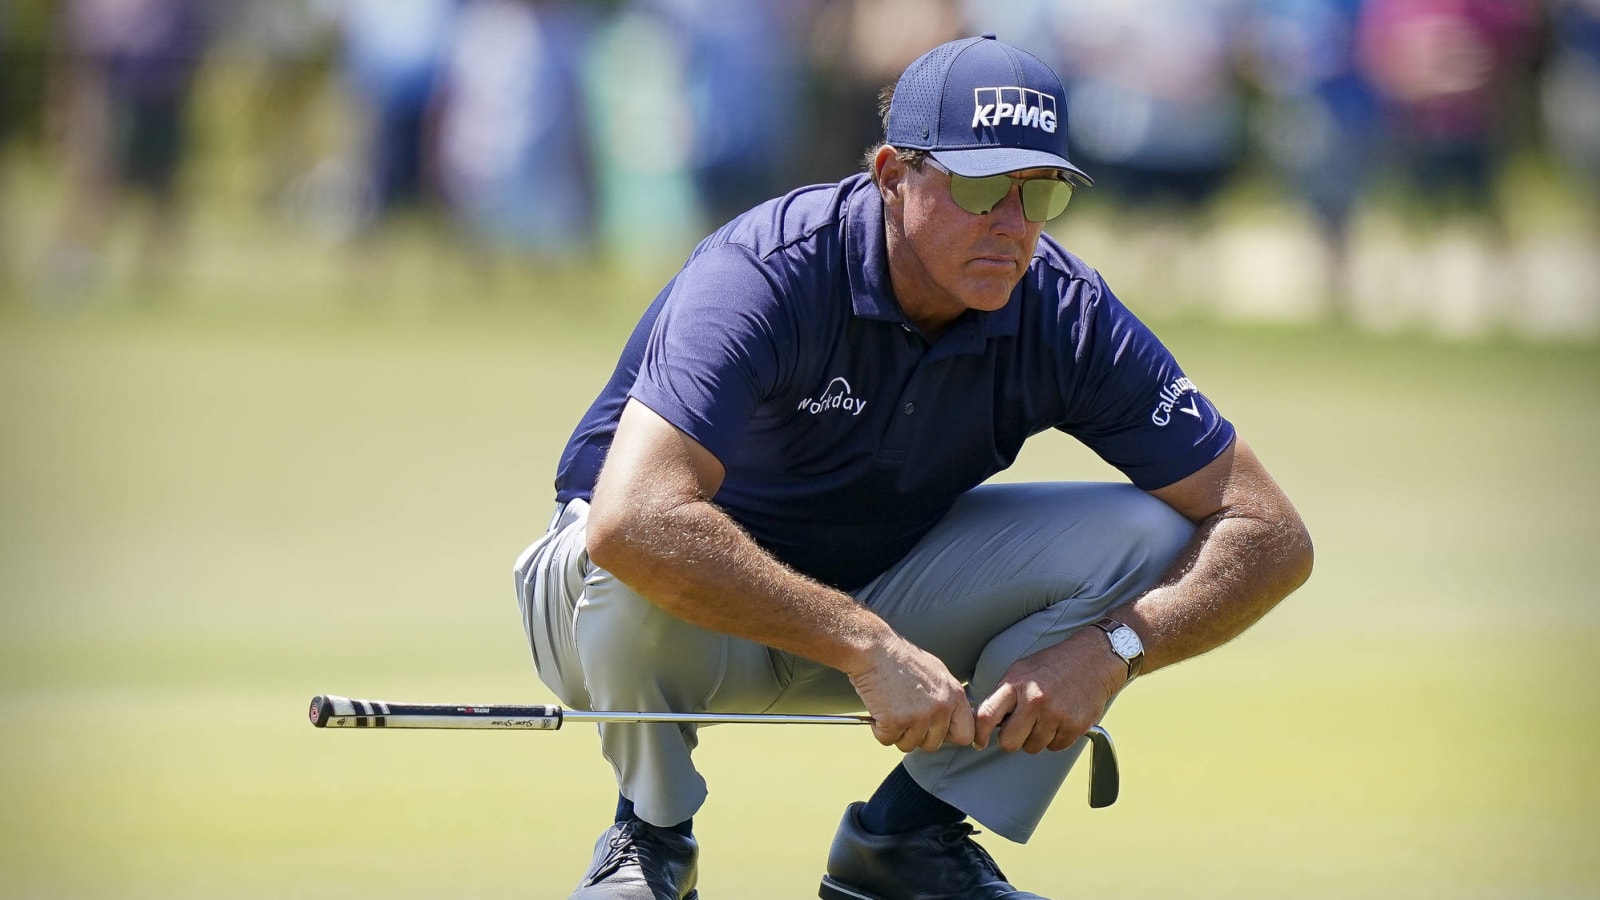 This Phil Mickelson tweet went viral after his PGA Championship win